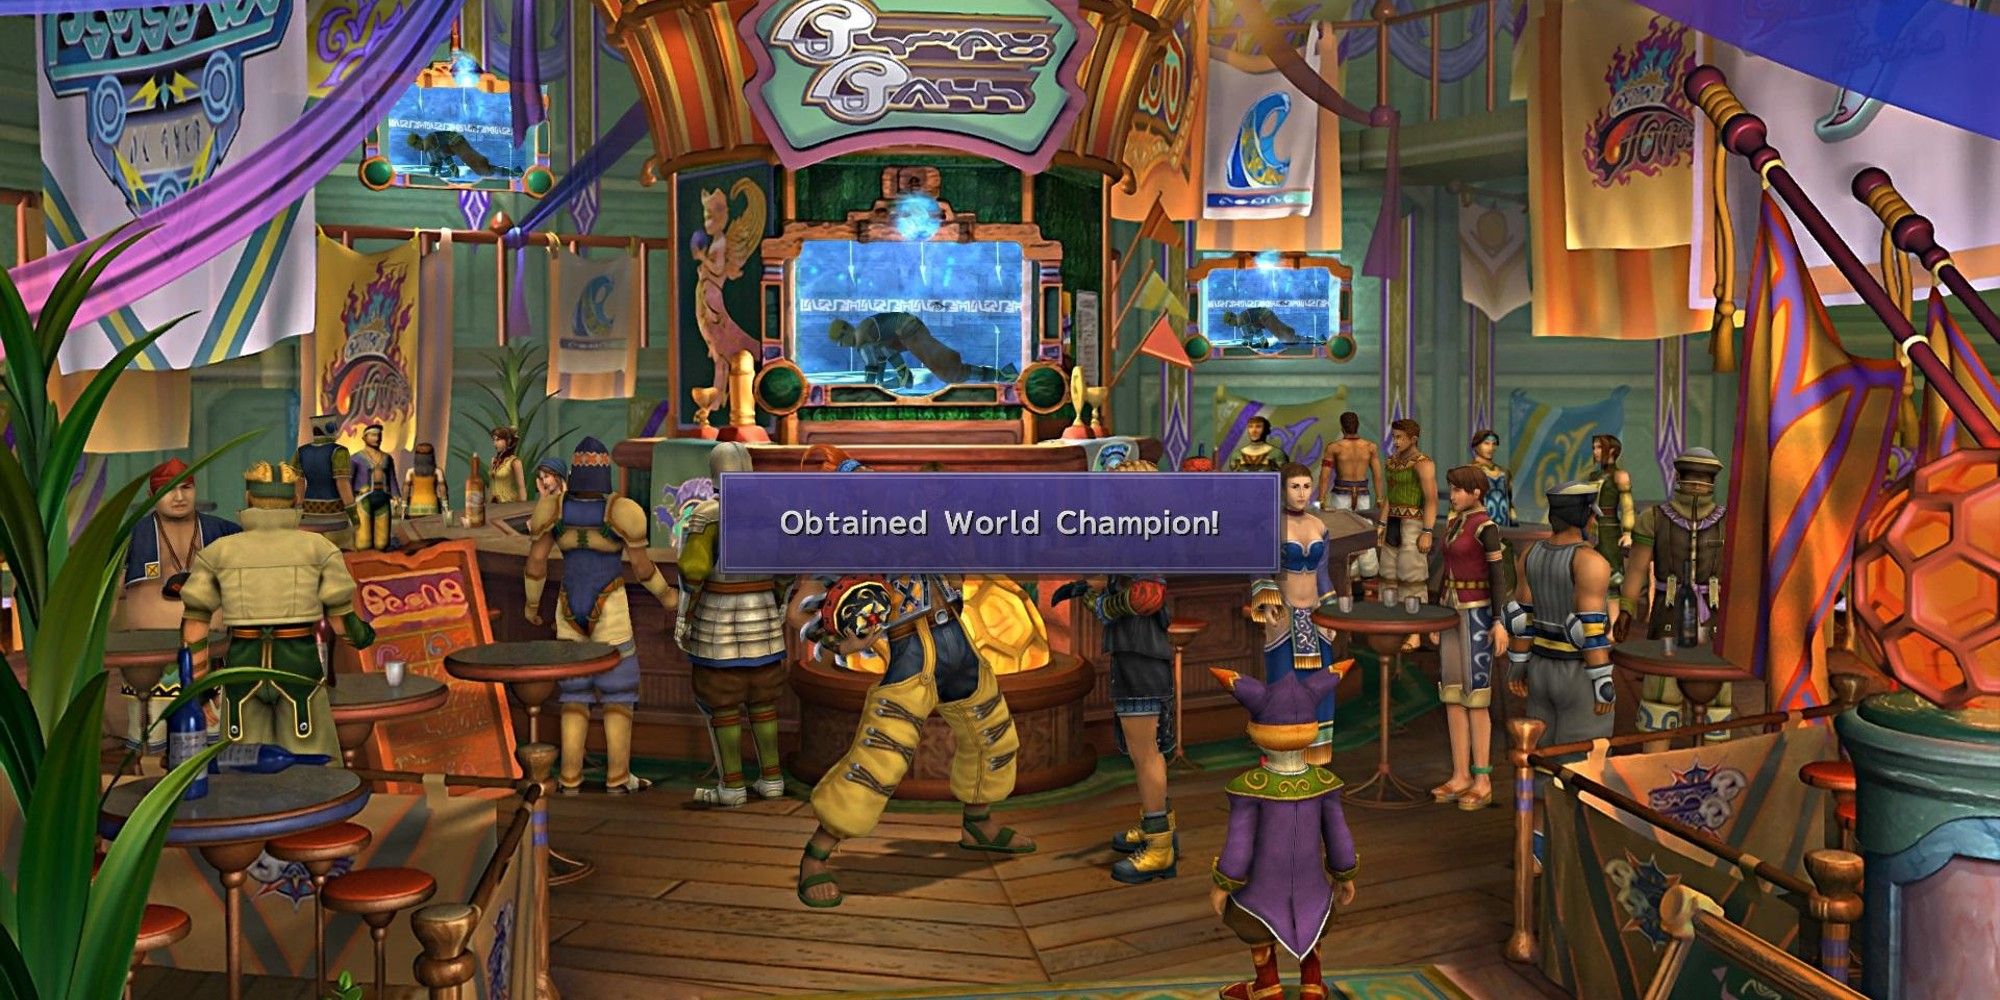 Wakka Gets World Champion From Shop With The Words World Champion Acquired In A Purple Box For Text - Final Fantasy 10